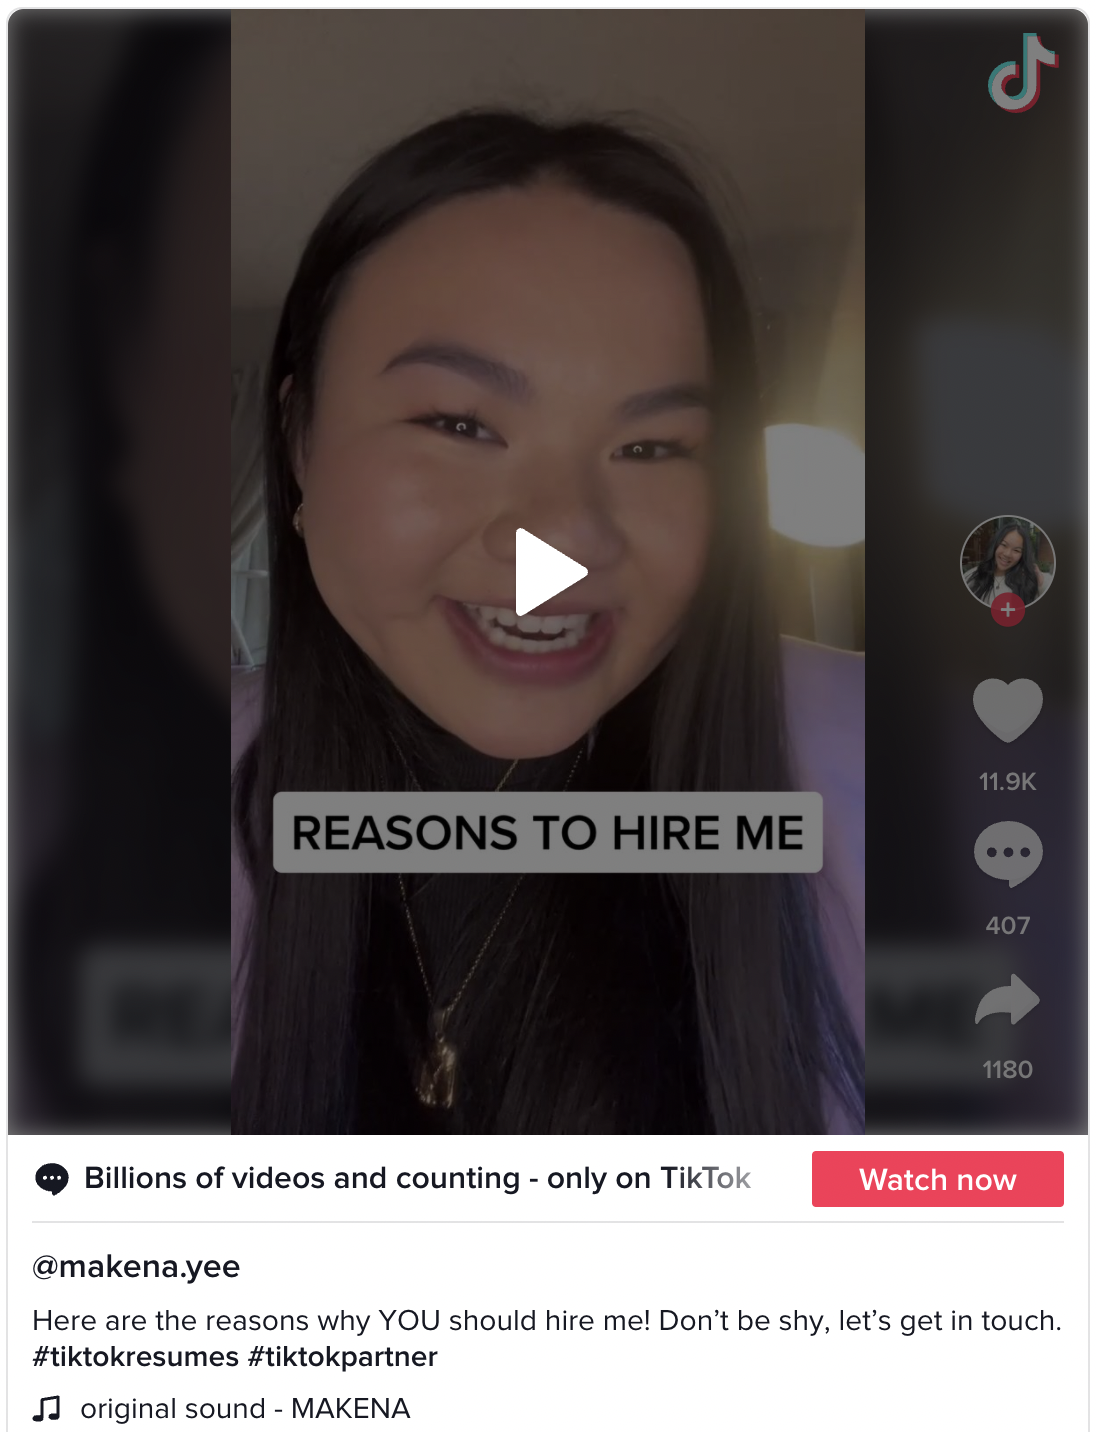 Find a job with TikTok Resumes